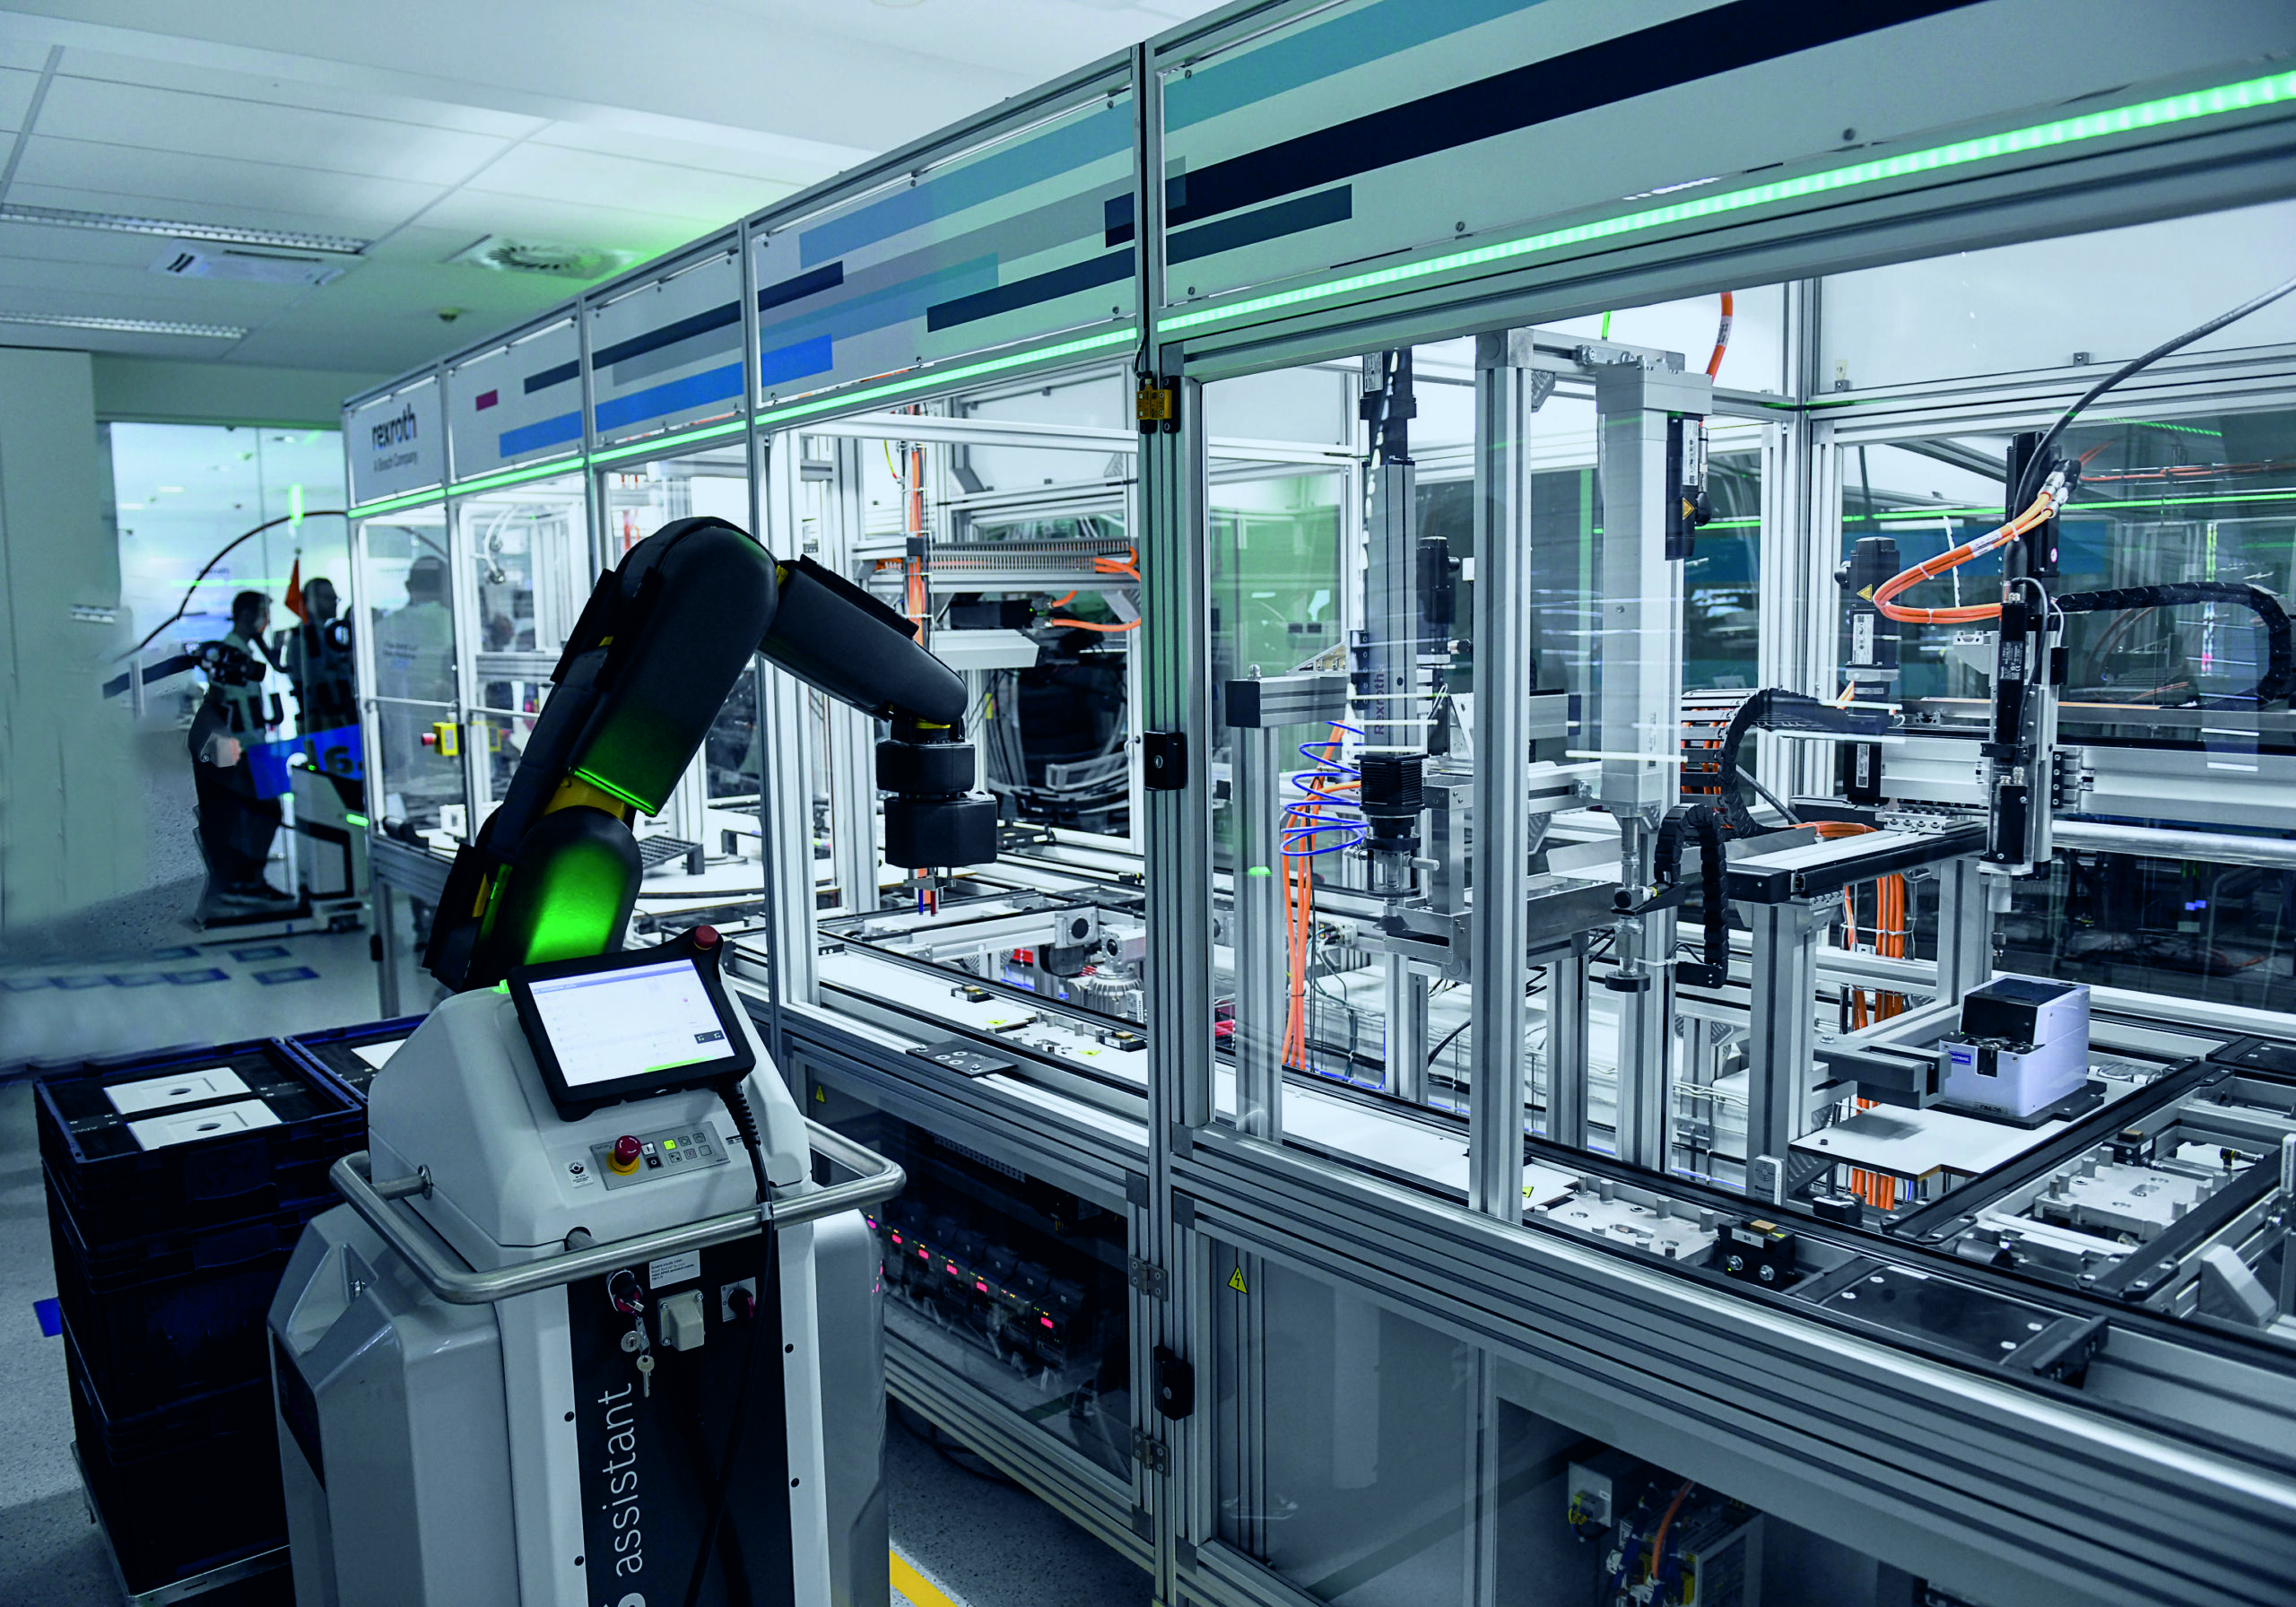 Demonstrator: Bosch Rexroth – Factory of the Future Lab